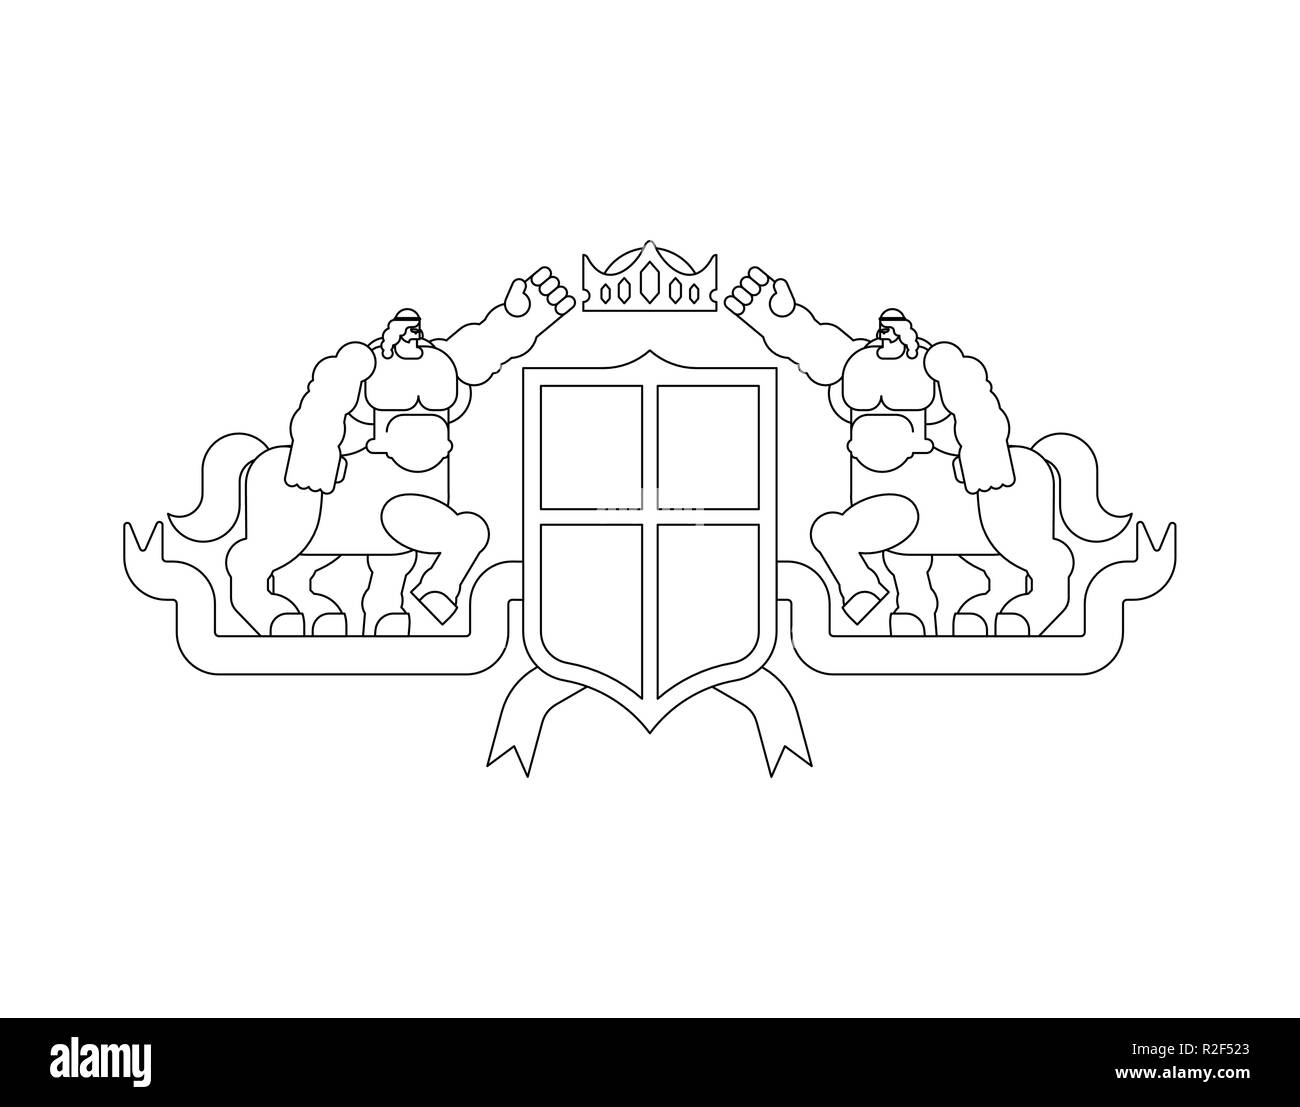 Heraldic Shield Centaur and crown. Fantastic Beasts. Template heraldry design element. Coat of arms of royal family Stock Vector